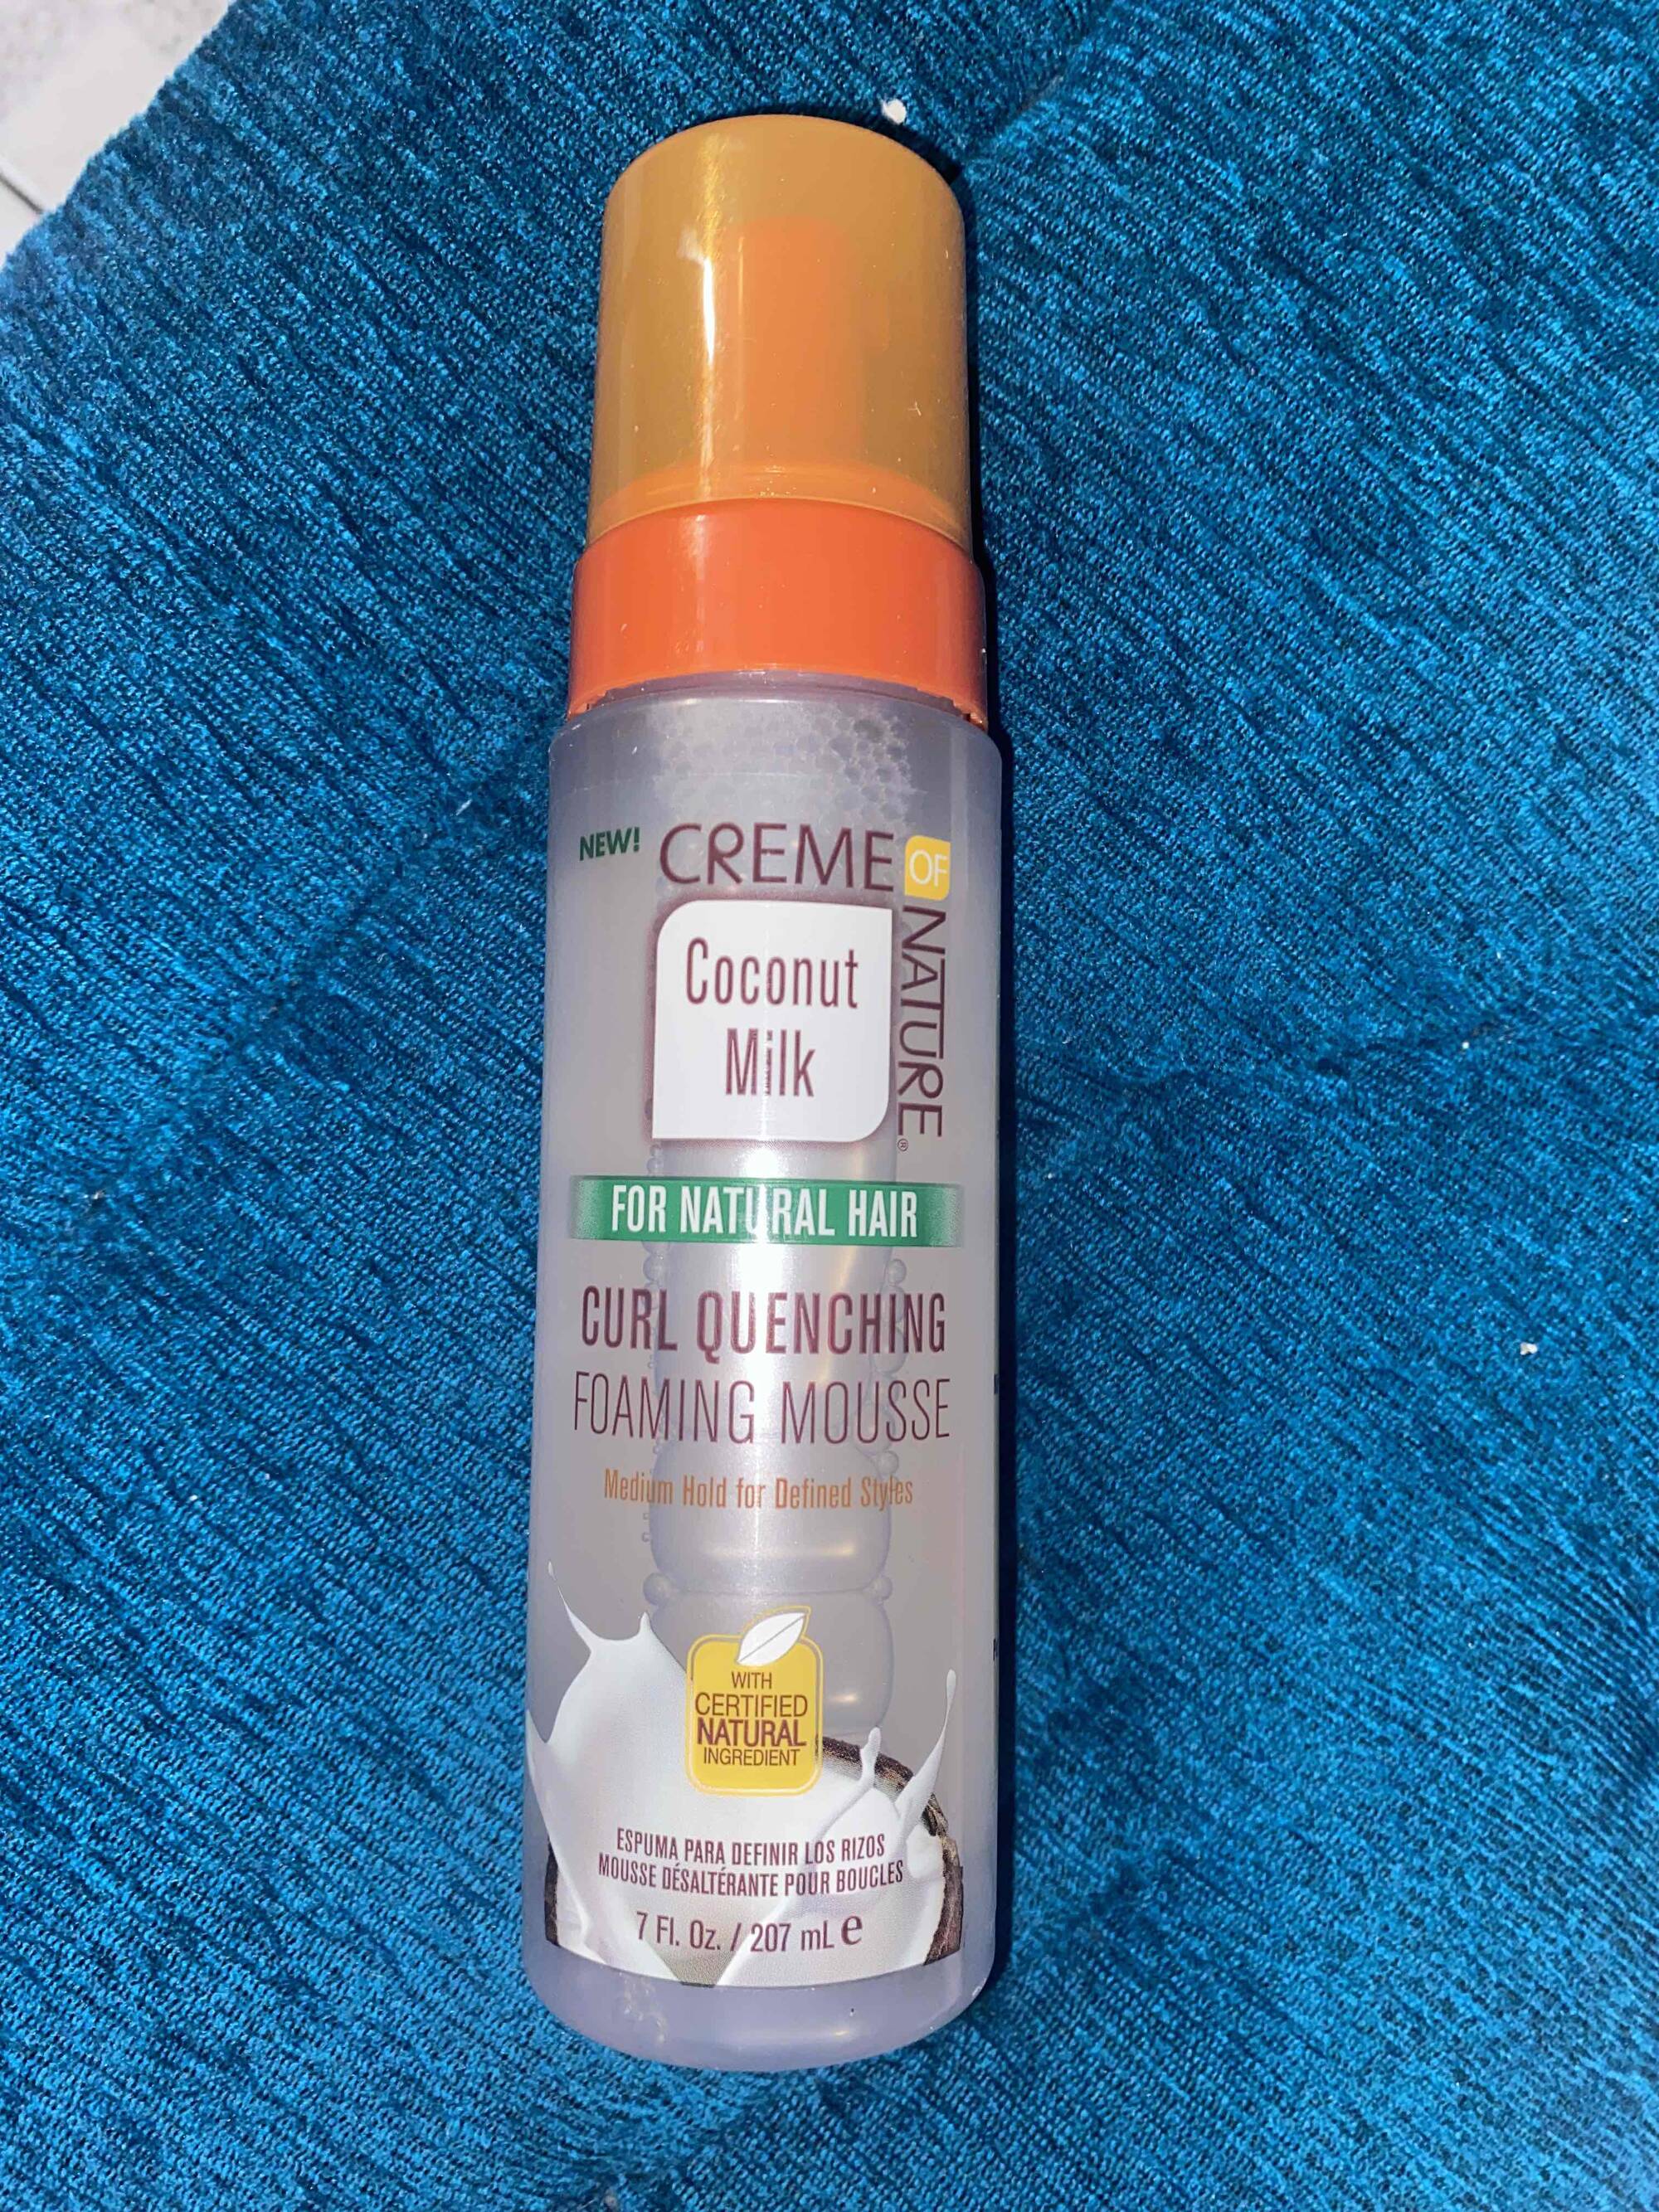 CREME OF NATURE - Coconut milk - Curl quenching foaming mousse